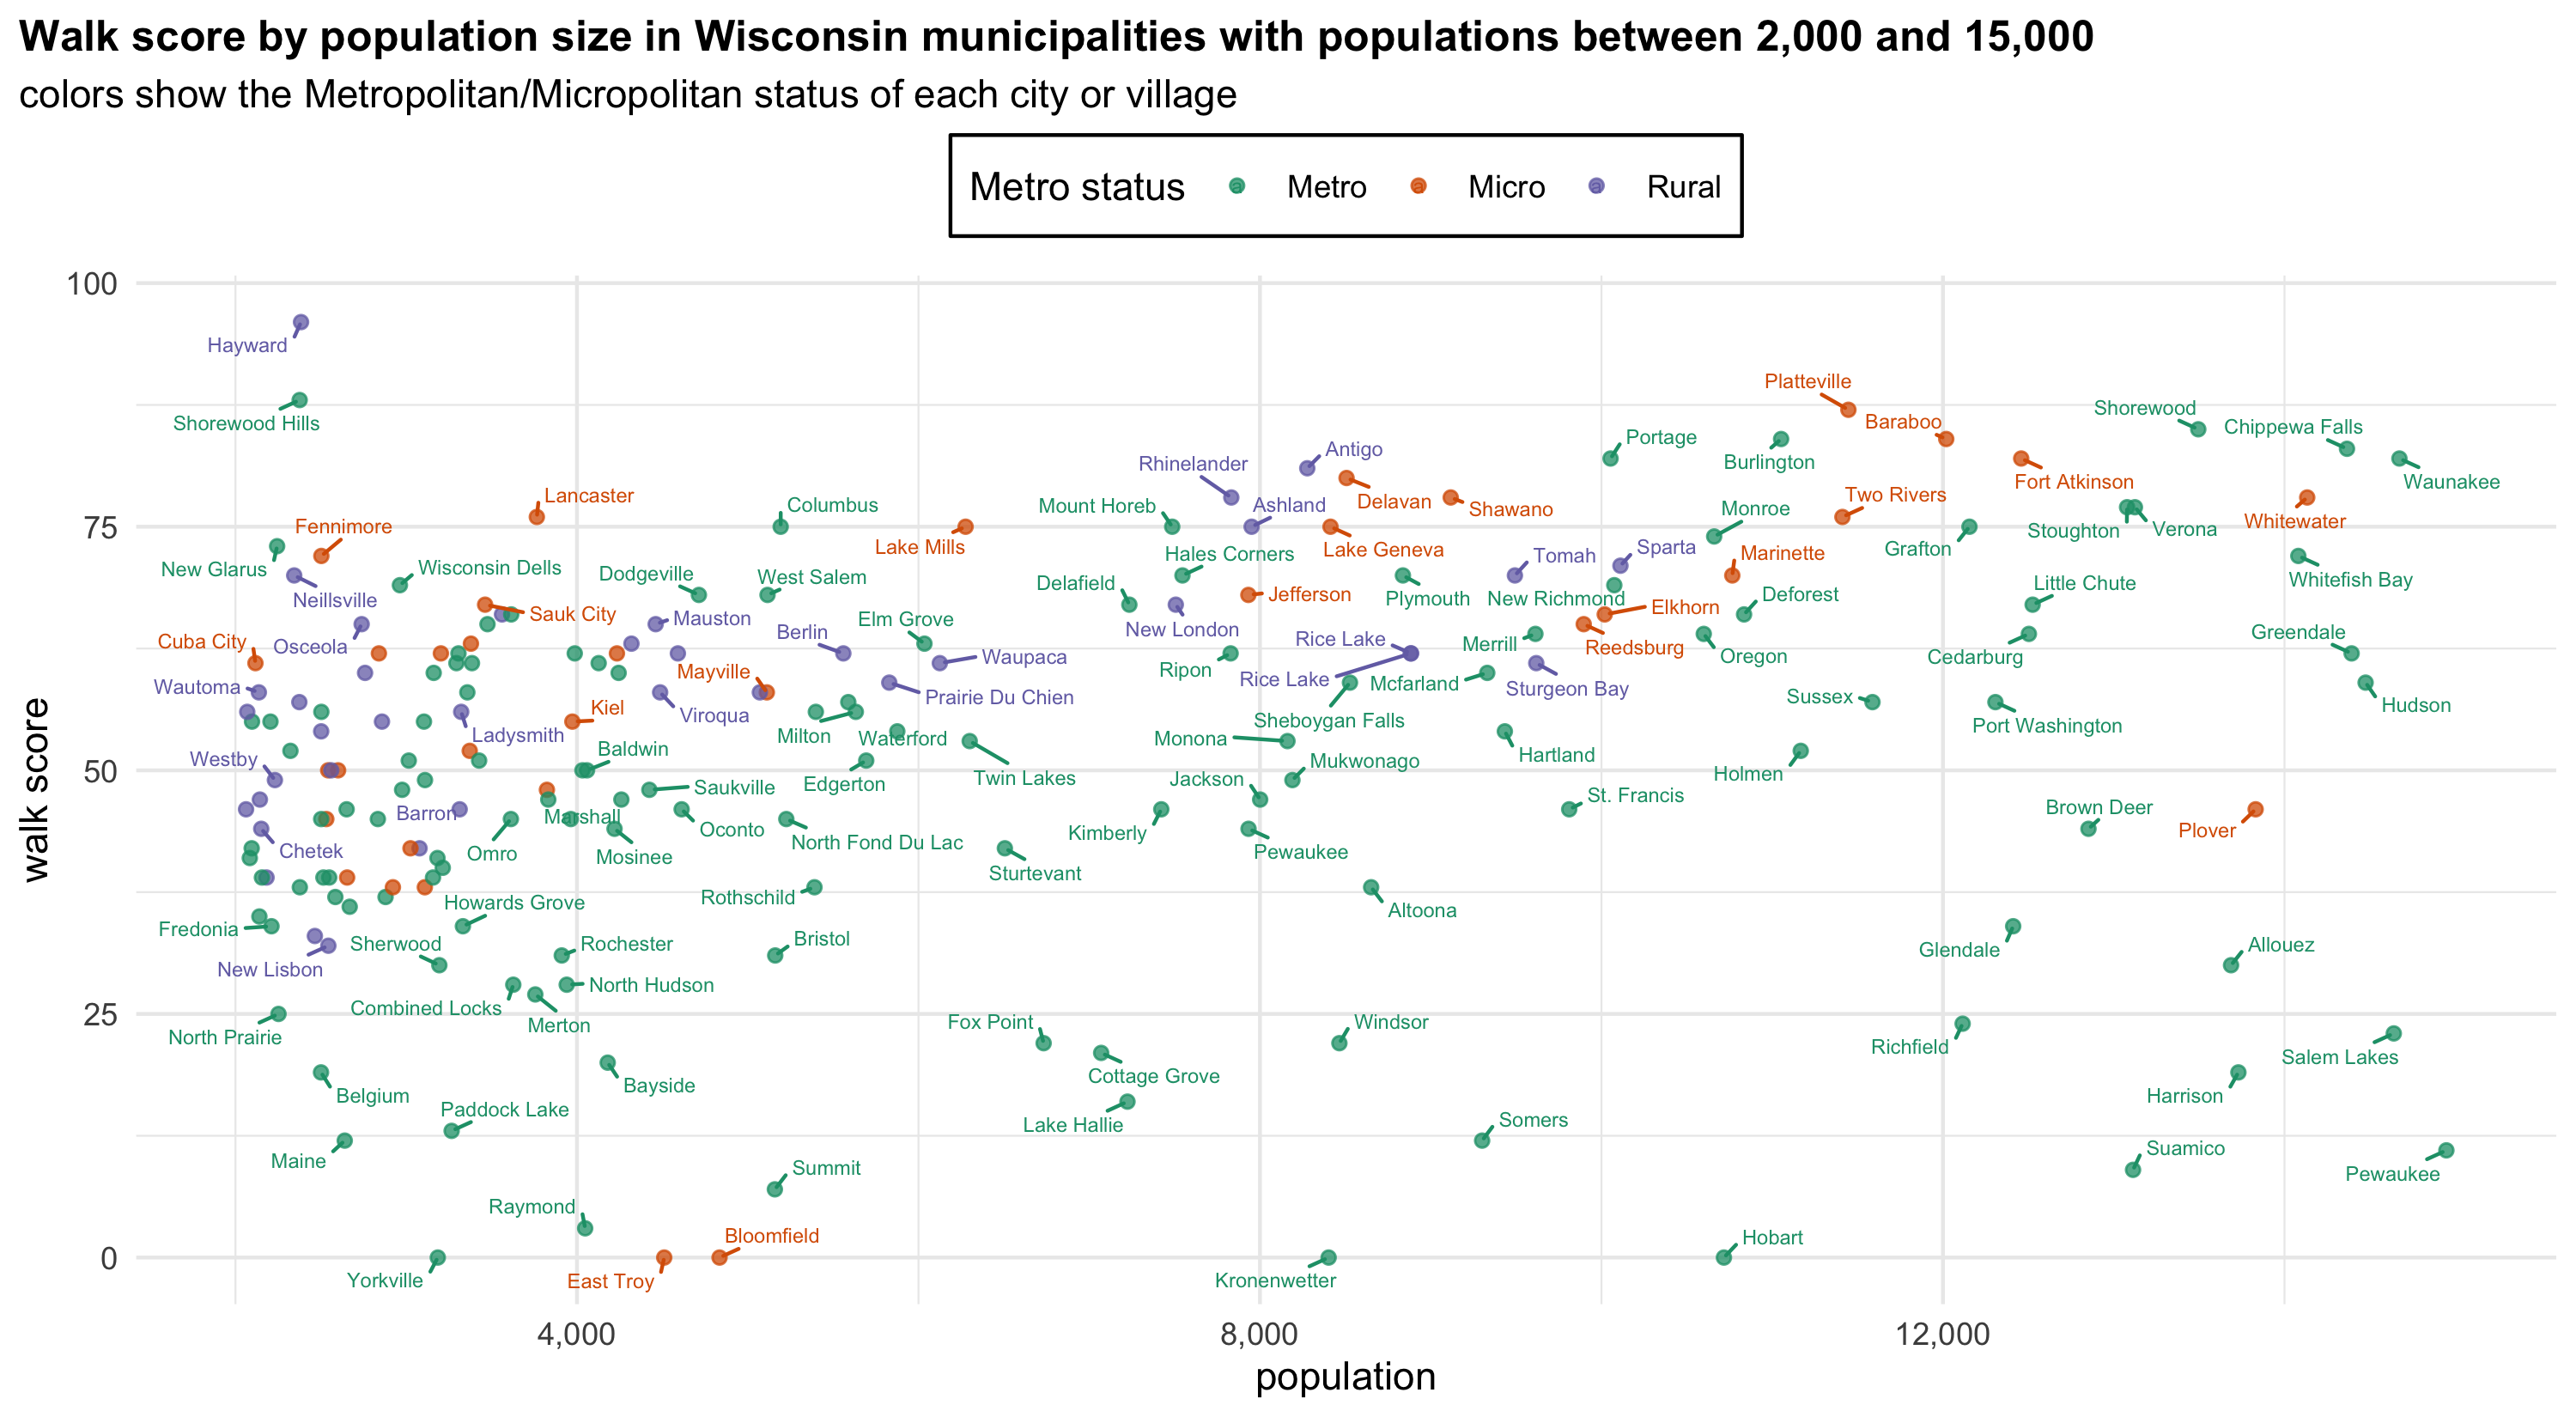 walk score by population for municipalities with population between 2500 and 15000